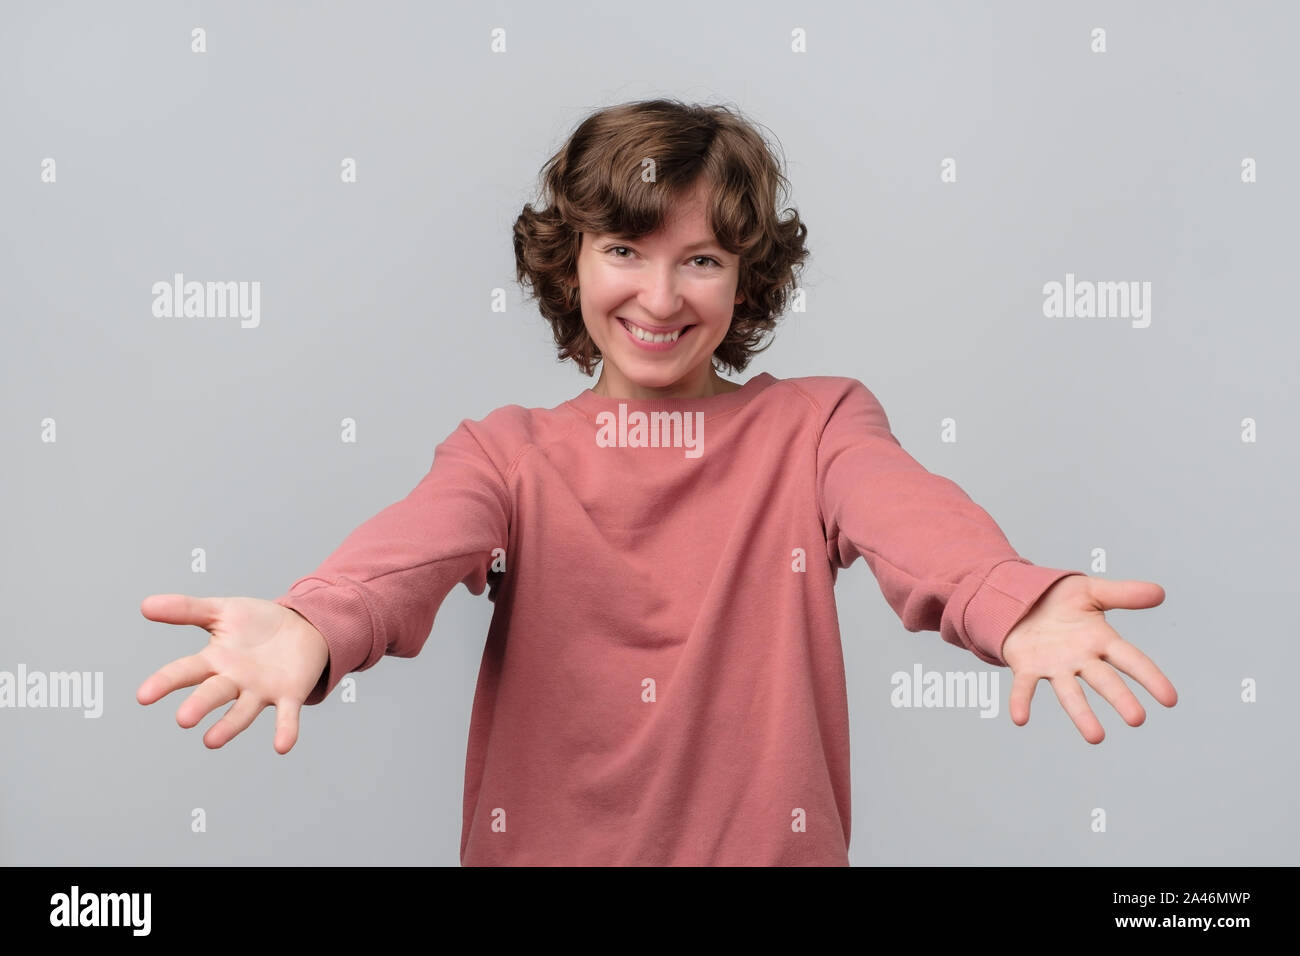 Girl in red sweater with stretched hands wants to hug her firends Stock Photo